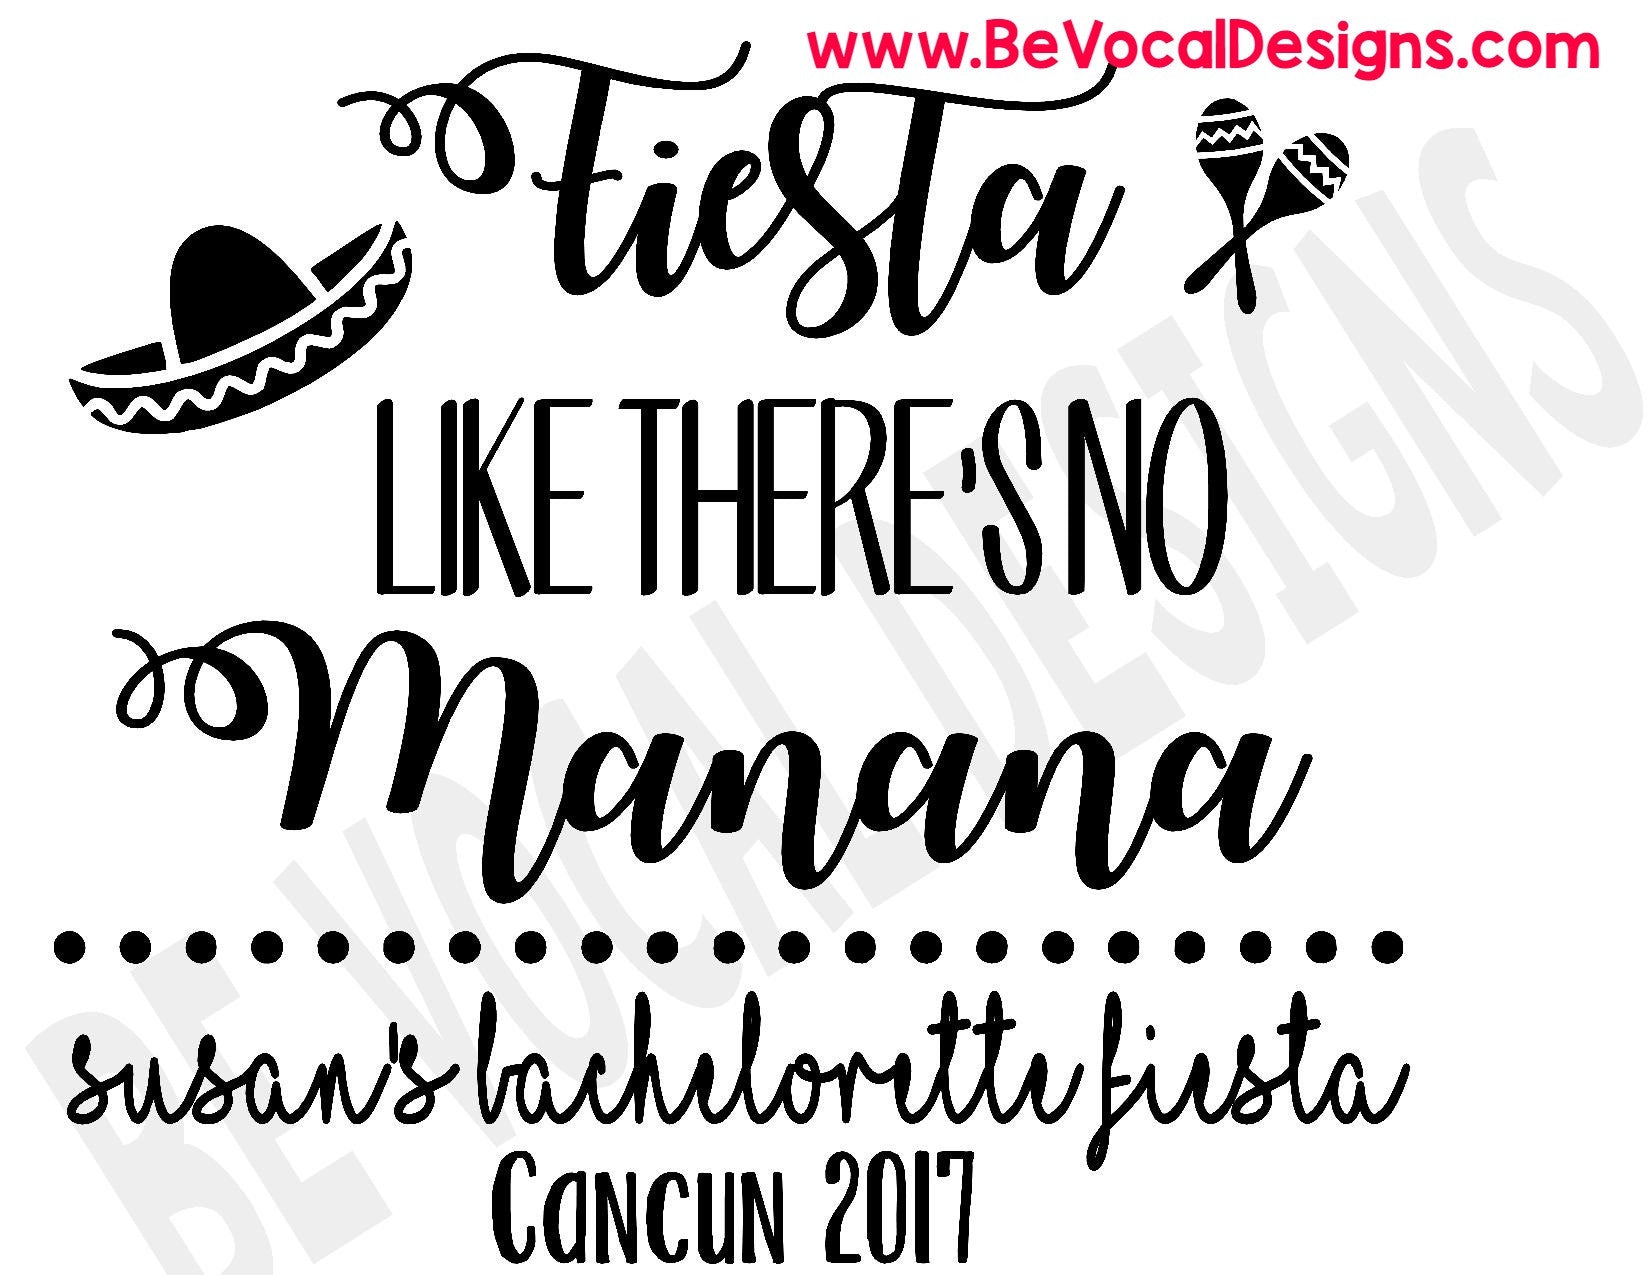 Fiesta Like There's No Manana Screen Printed Women's Tee Shirts - Be Vocal Designs